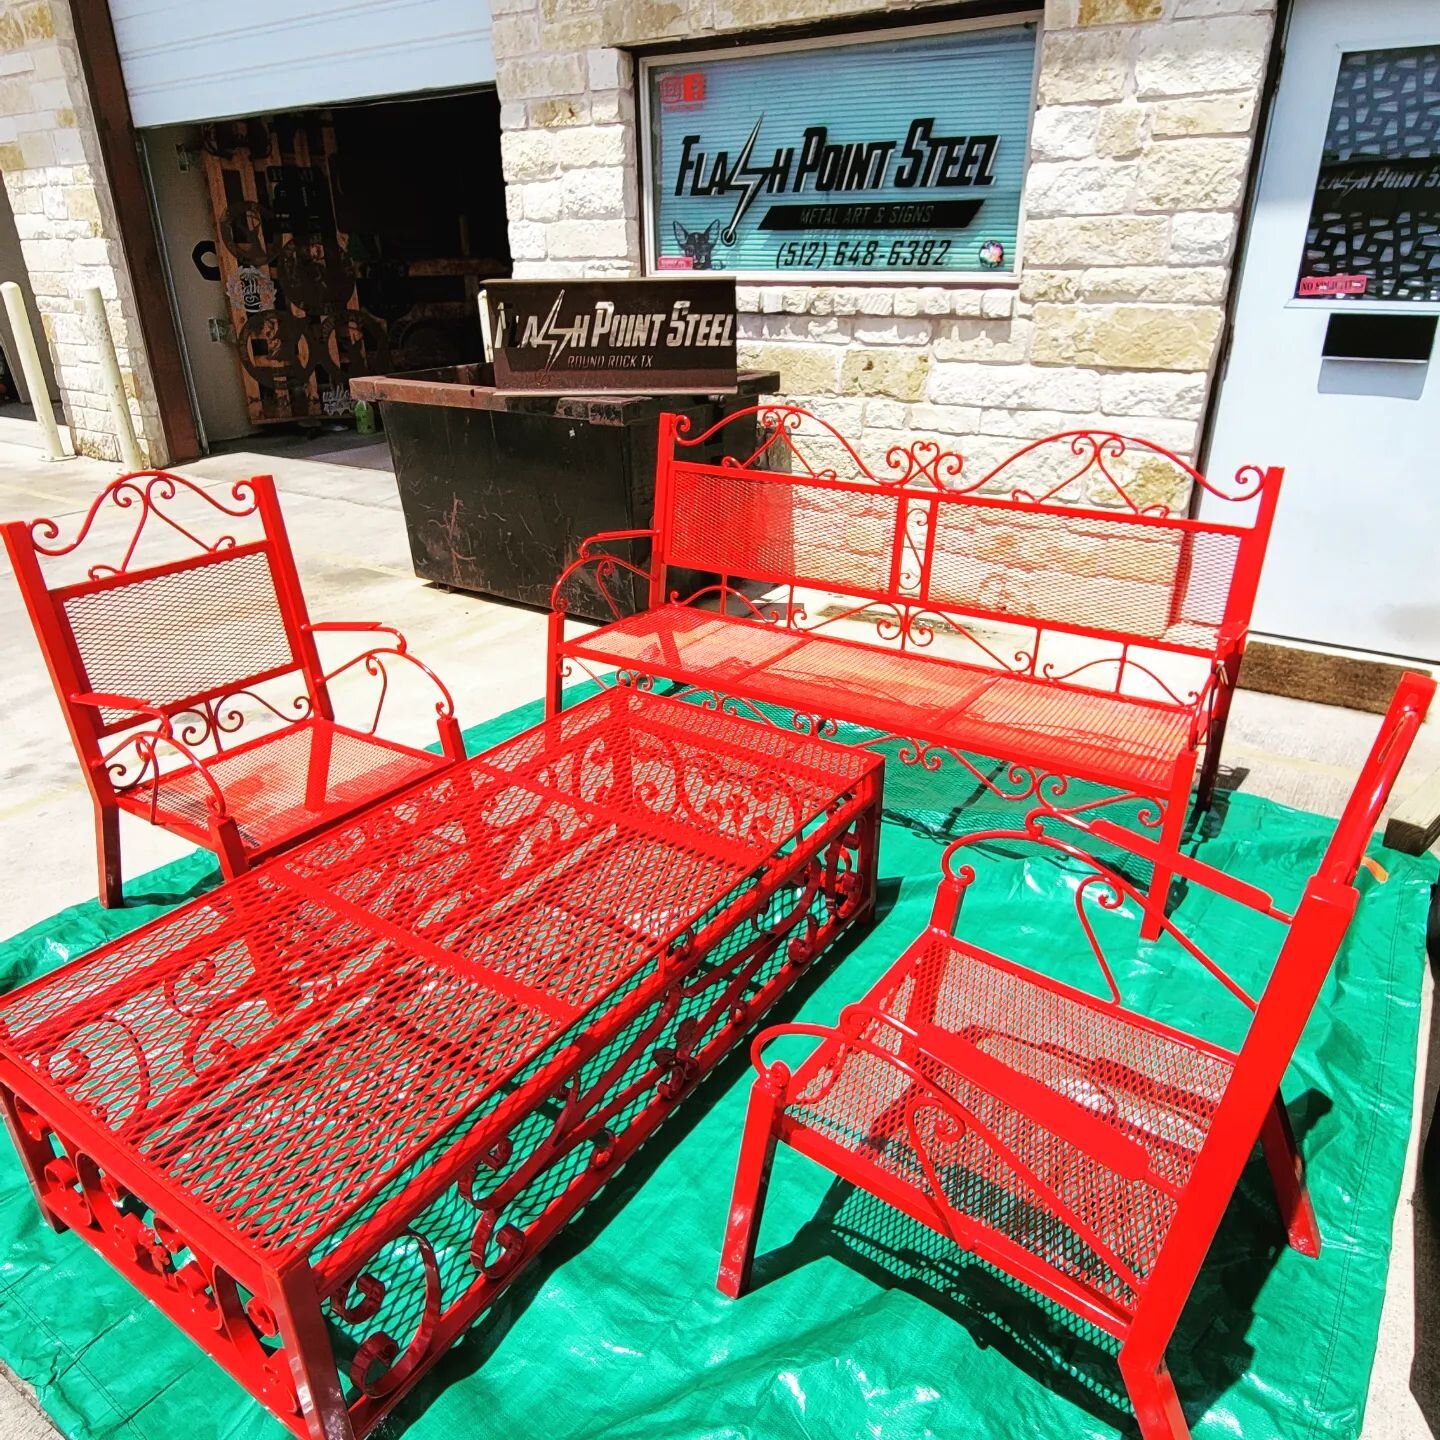 🔥Freshly restored 1970's patio furniture.
Acid treated, primered and color powder coated to last for many years to come.🔥

Ask us about our steel restoration services @flashpointsteel 

#powdercoating #sandblasting #restoration #outdoorfurniture #o